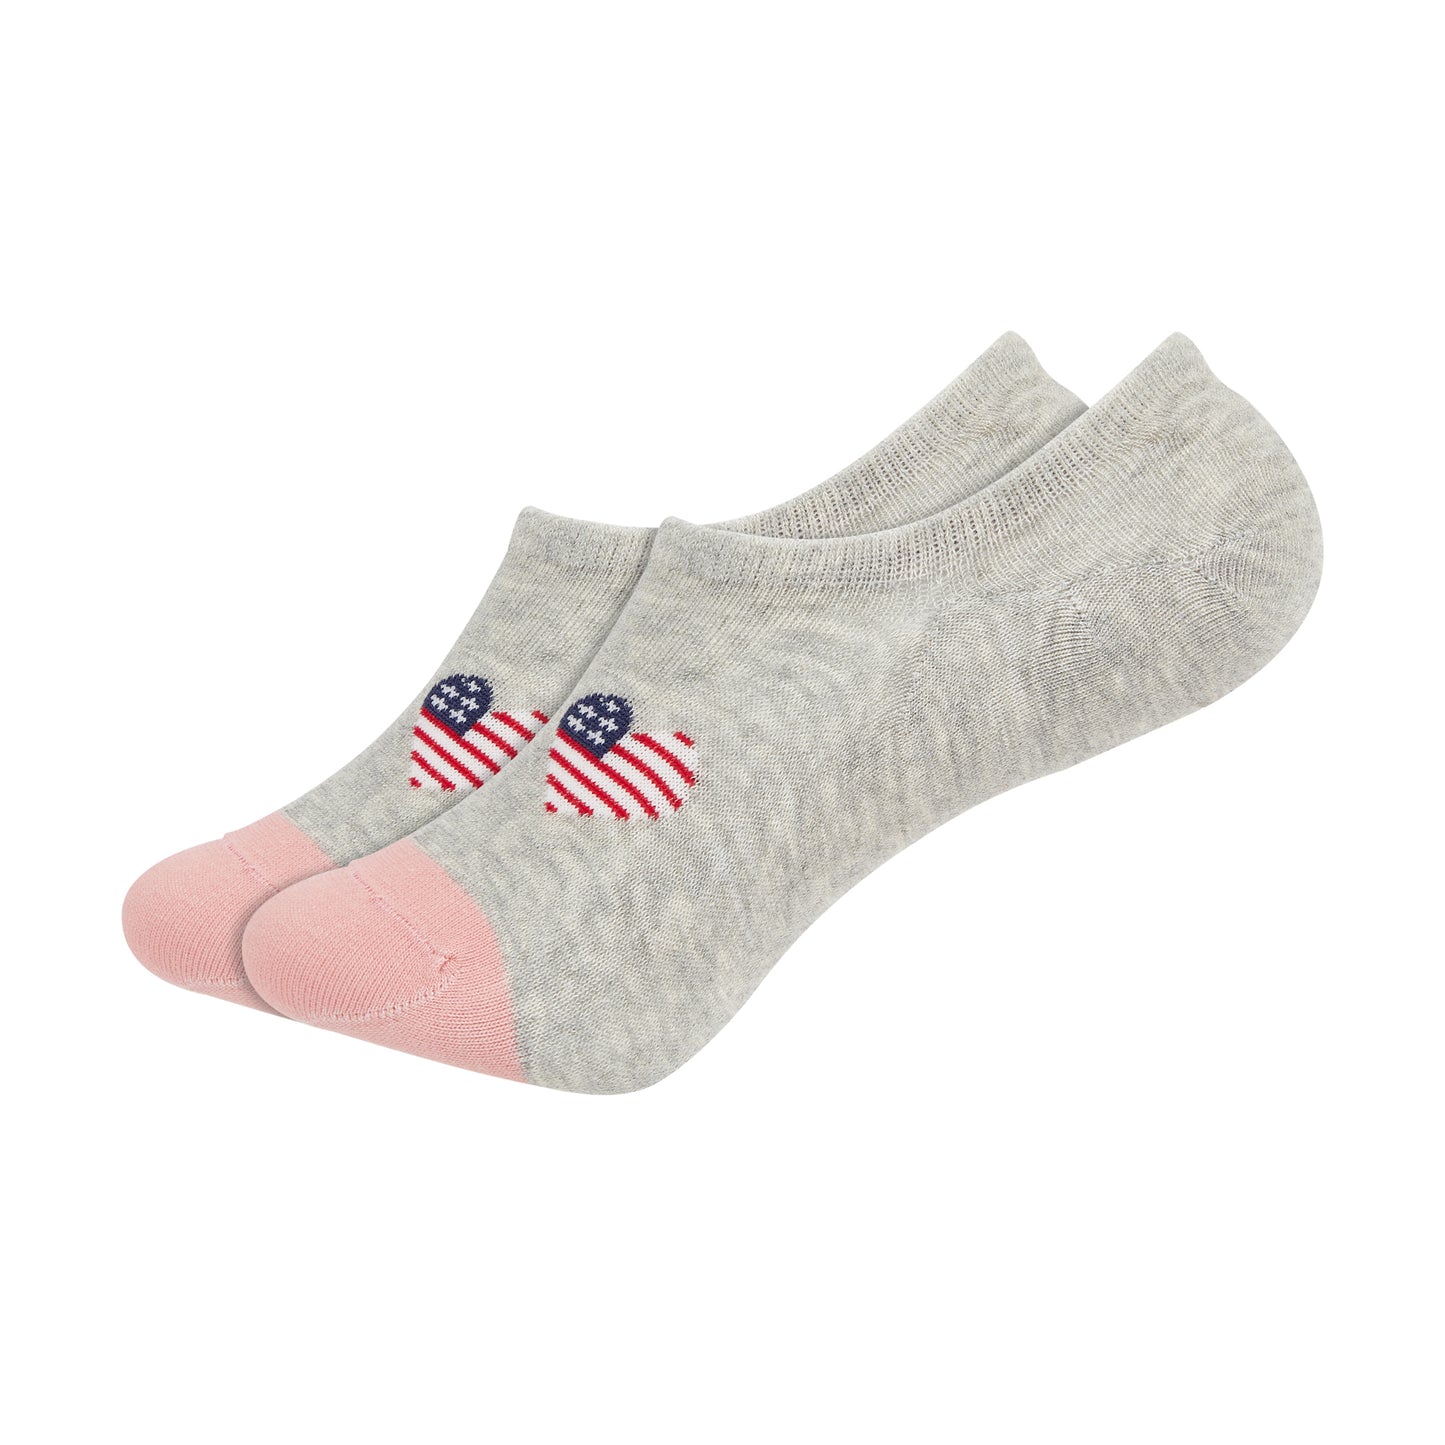 Women's Invisible Foot Socks 4-in-1 Set with USA Heart Print - IDENTITY Apparel Shop